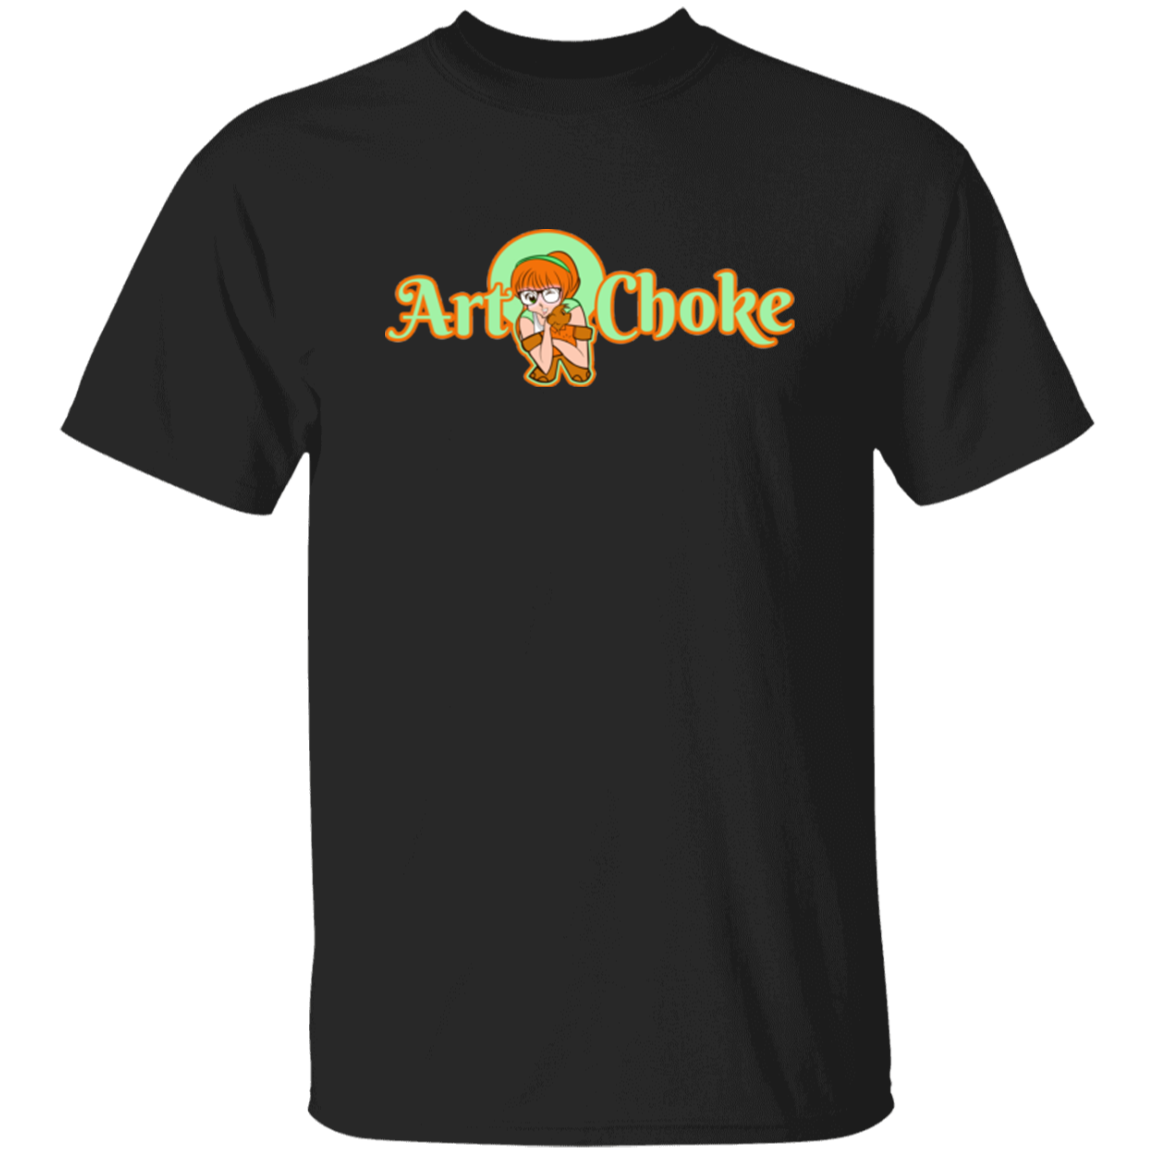 ArtichokeUSA Character and Font Design. Let’s Create Your Own Design Today. Winnie. 5.3 oz. T-Shirt